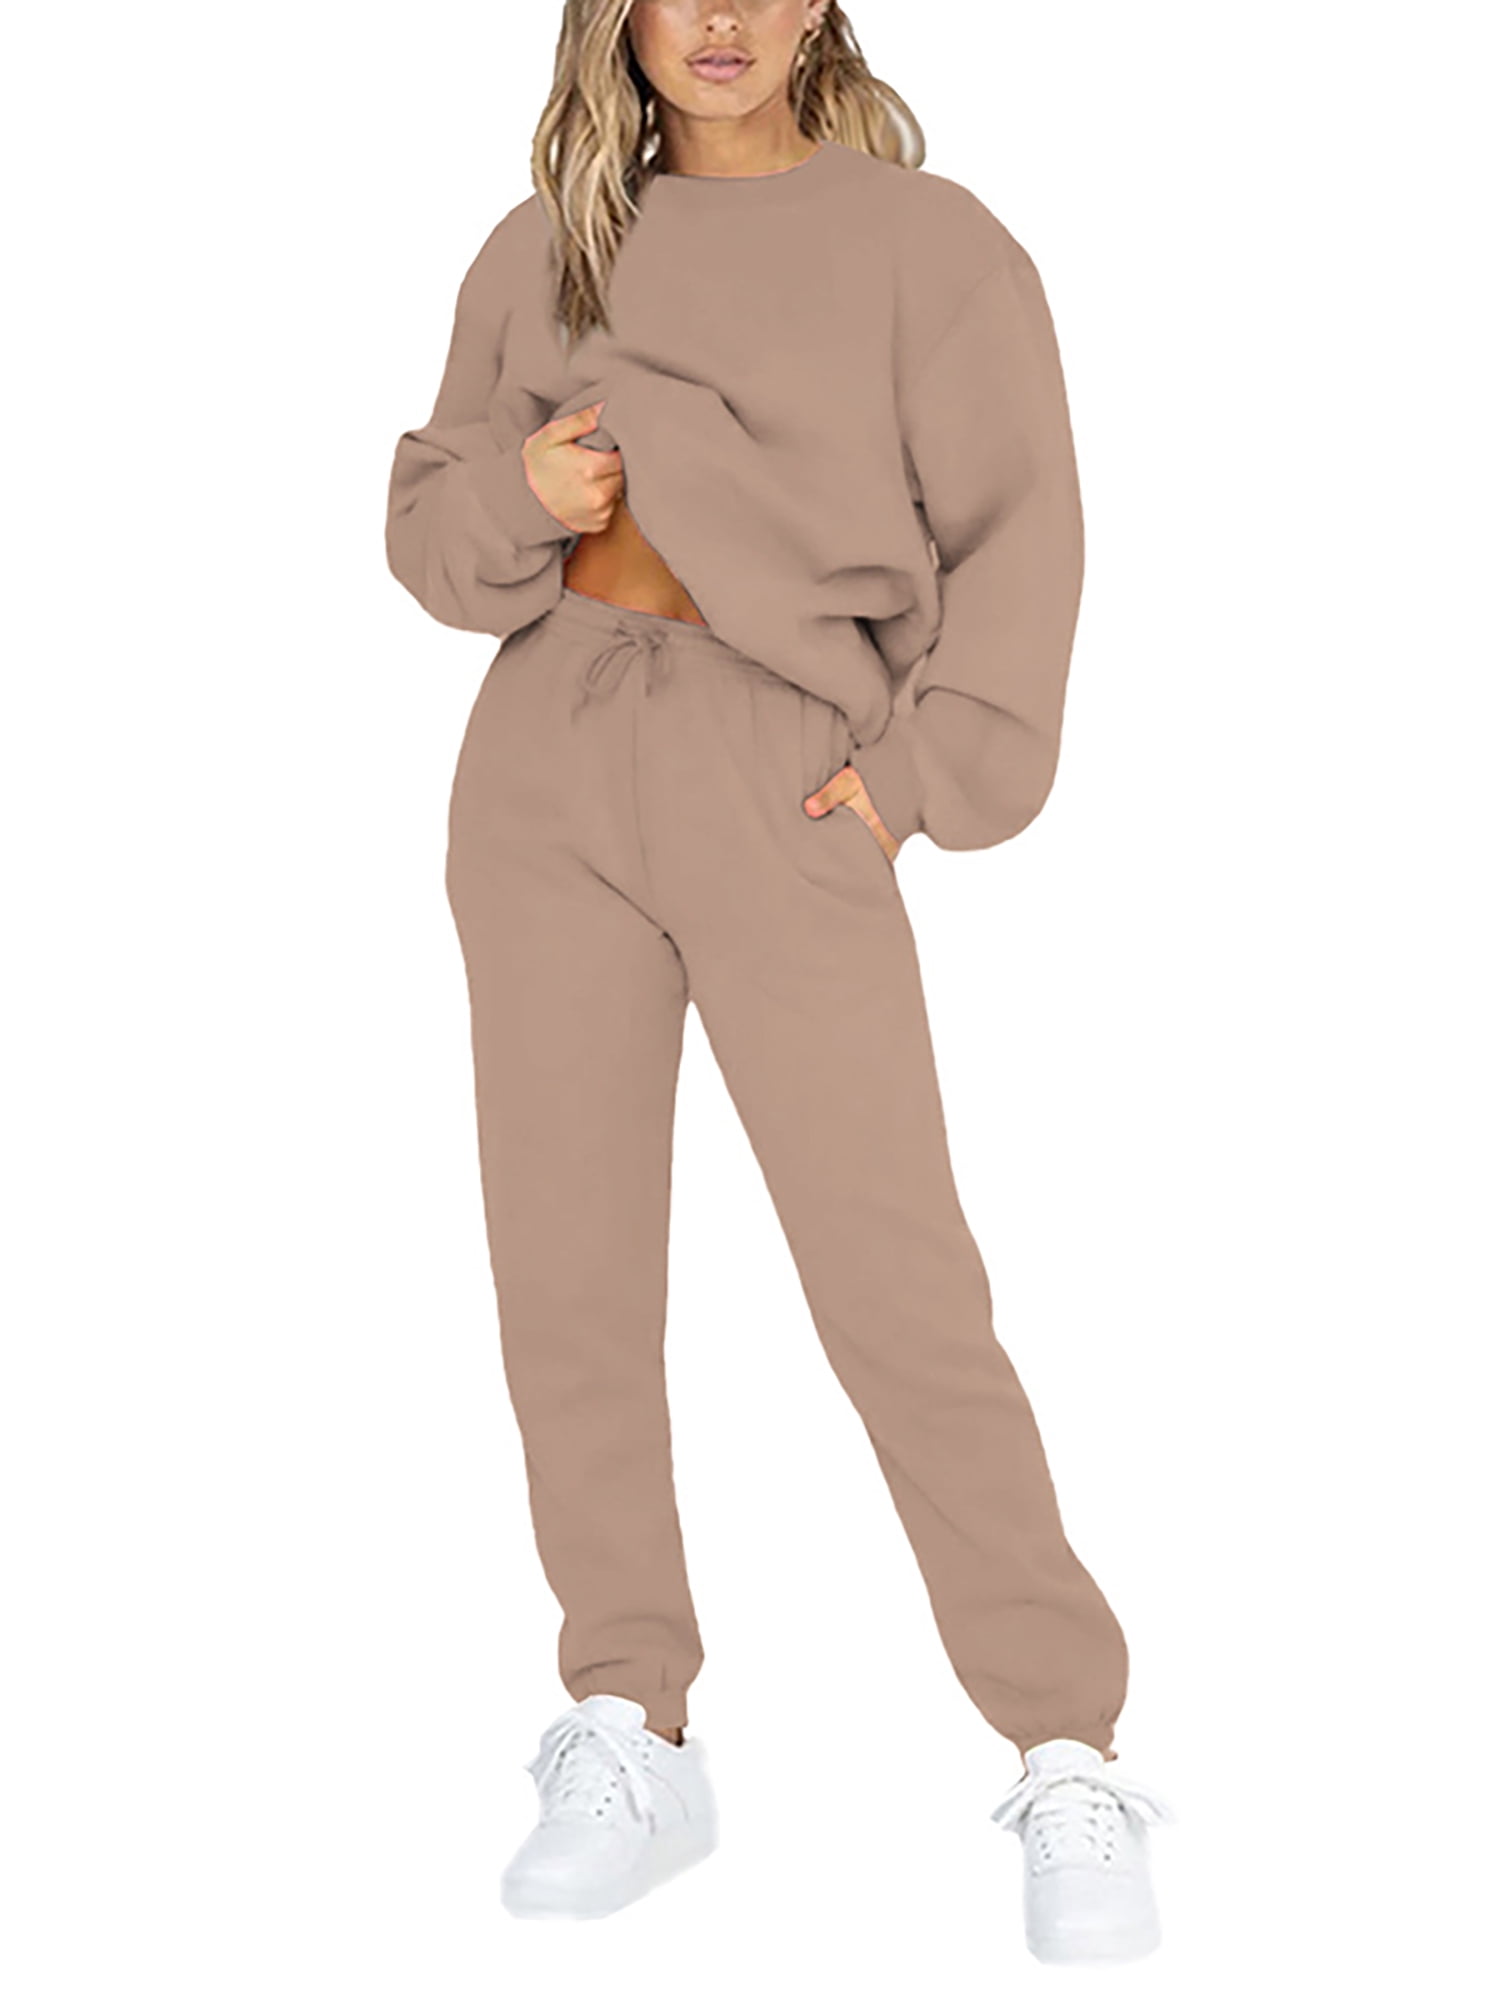 Cindysus Ladies Jogger Set Elastic Waist Sweatsuits Long Sleeve Two Piece  Outfit Running Sweatshirts And Sweatpants Thick Lounge Sets Pink 5XL 